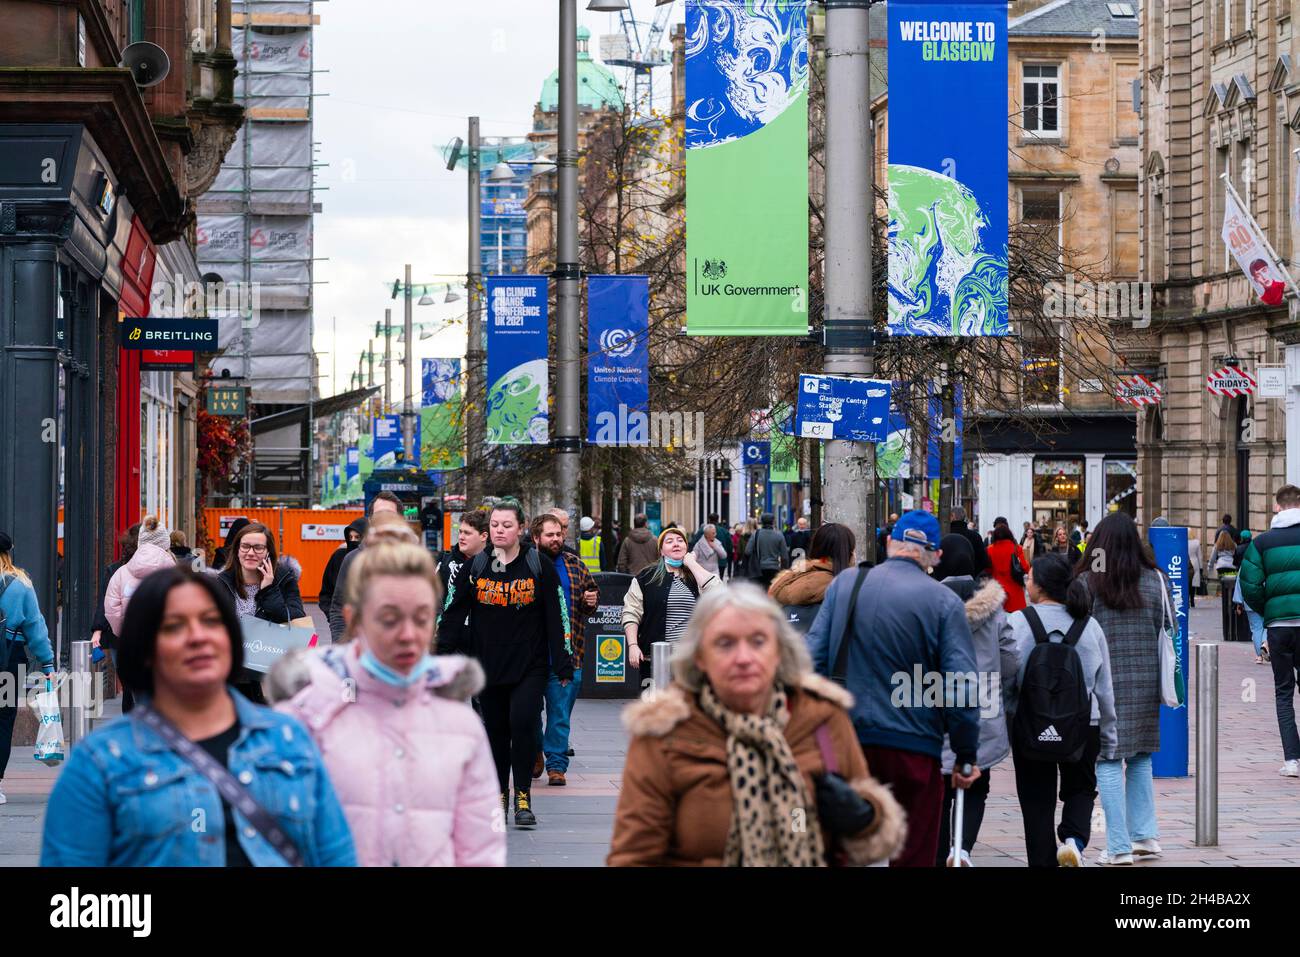 Glasgow, Scotland, UK. 1st November 2021. Images from Monday at the UN climate change conference in Glasgow. Pic; Street scene on Buchanan Street during the COP26 event.  Iain Masterton/Alamy Live News. Stock Photo